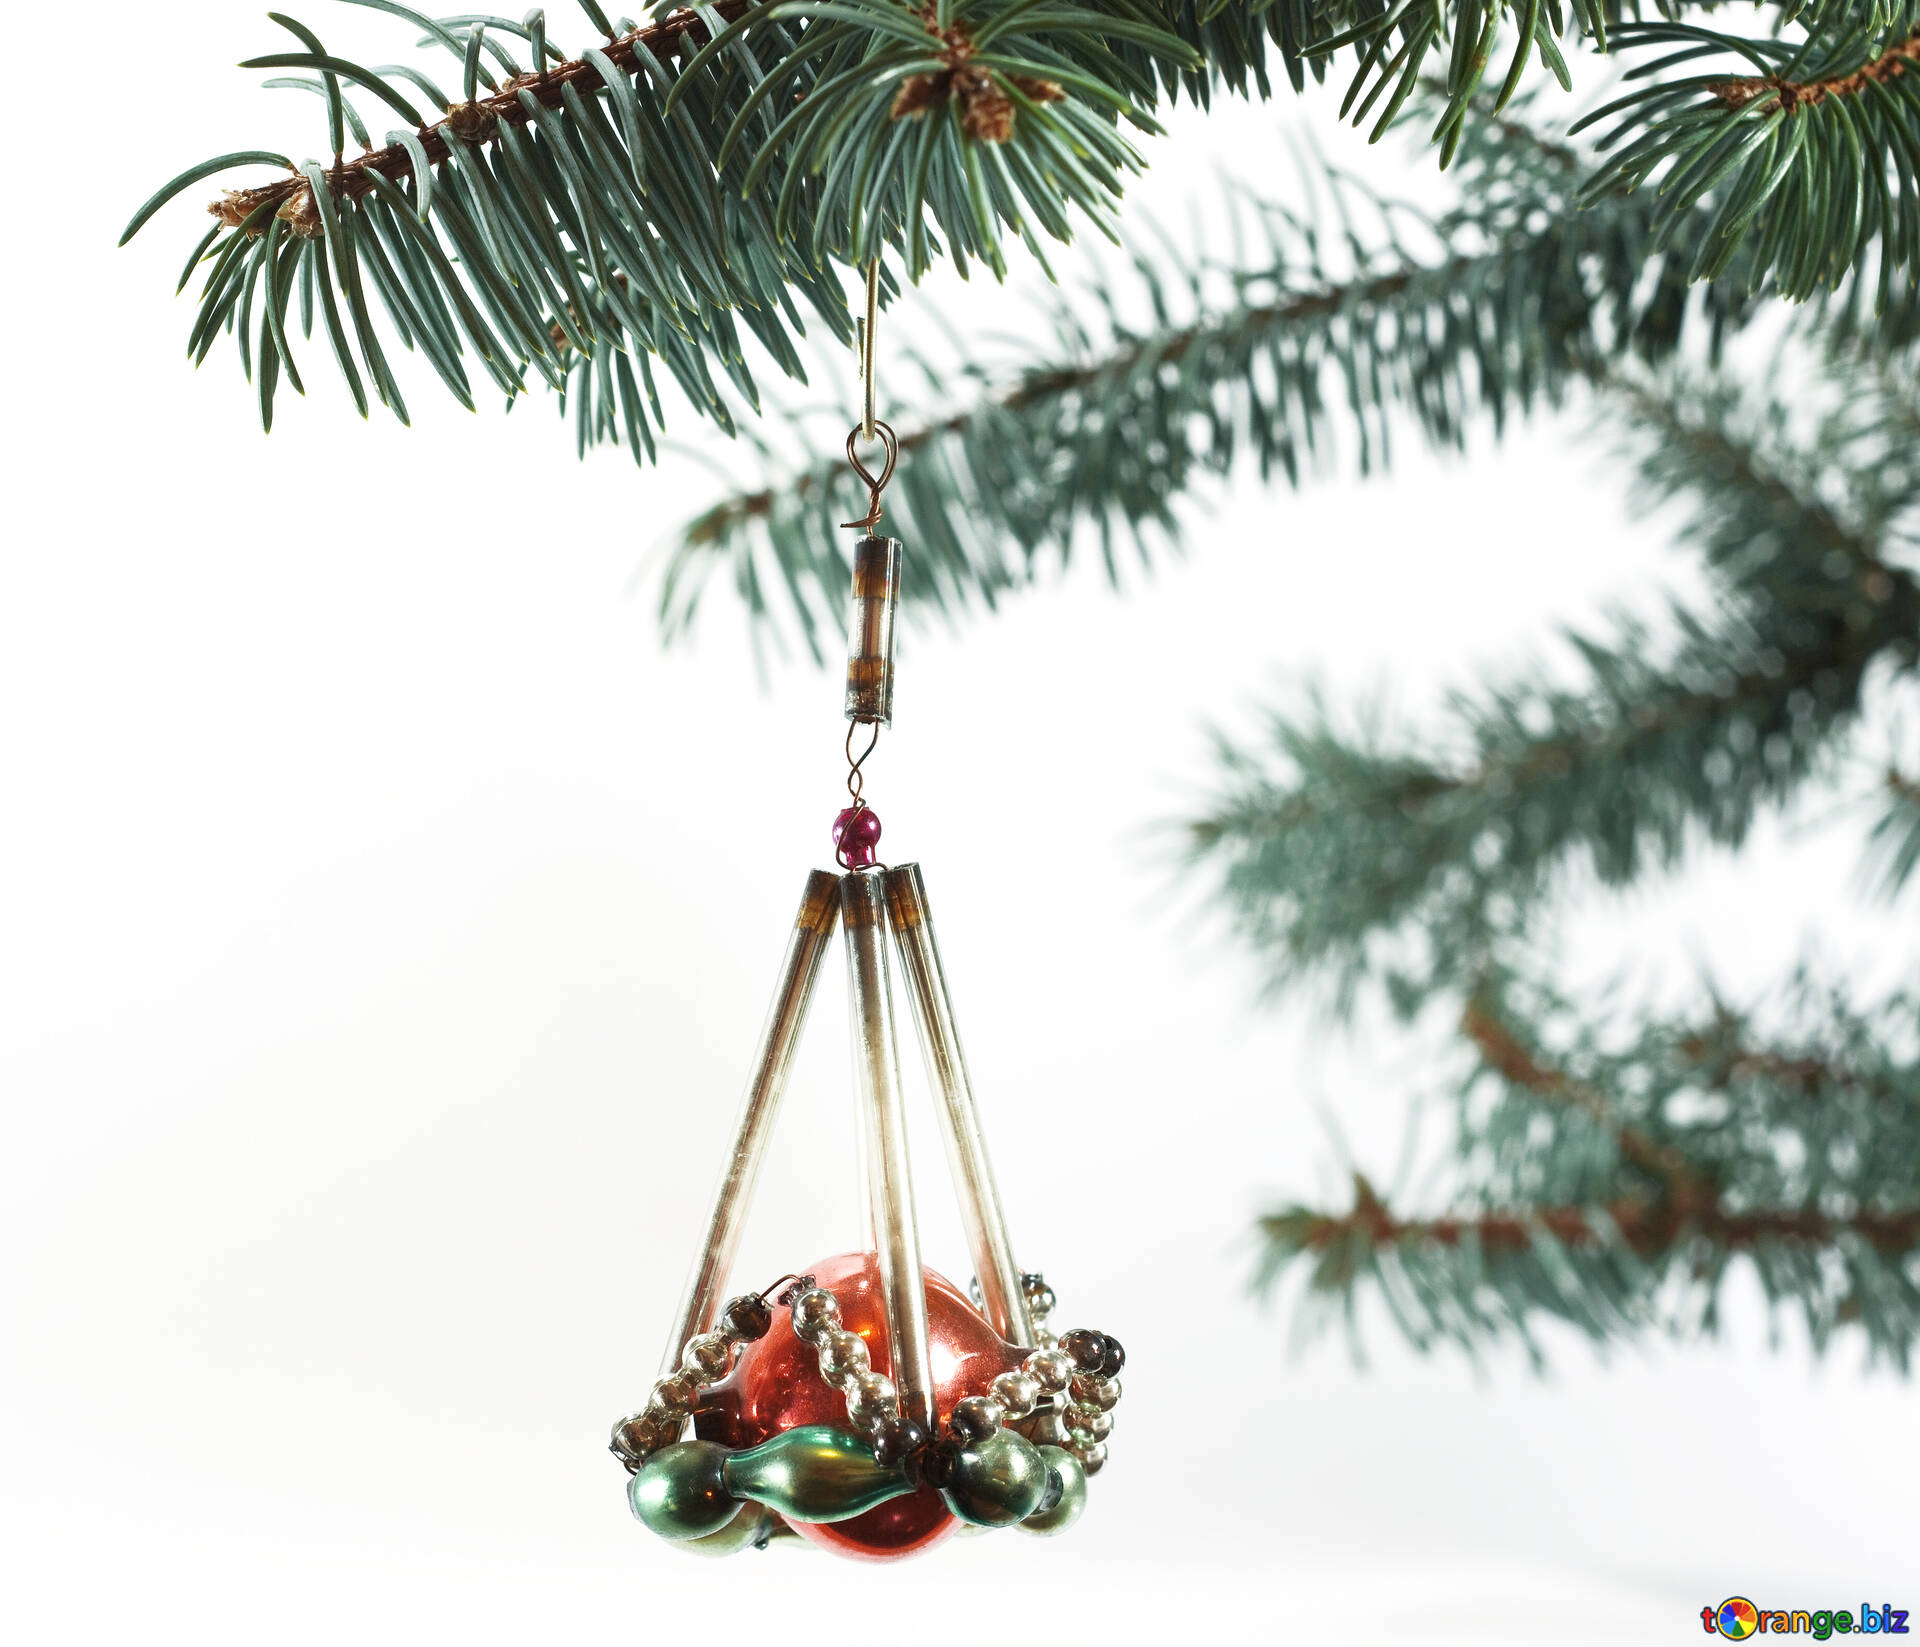 Vintage New Year And Christmas Ornaments Image Antique Christmas Tree Toy At White Background Image Isolate № 6755. Torange.biz Free Pics On Cc By License